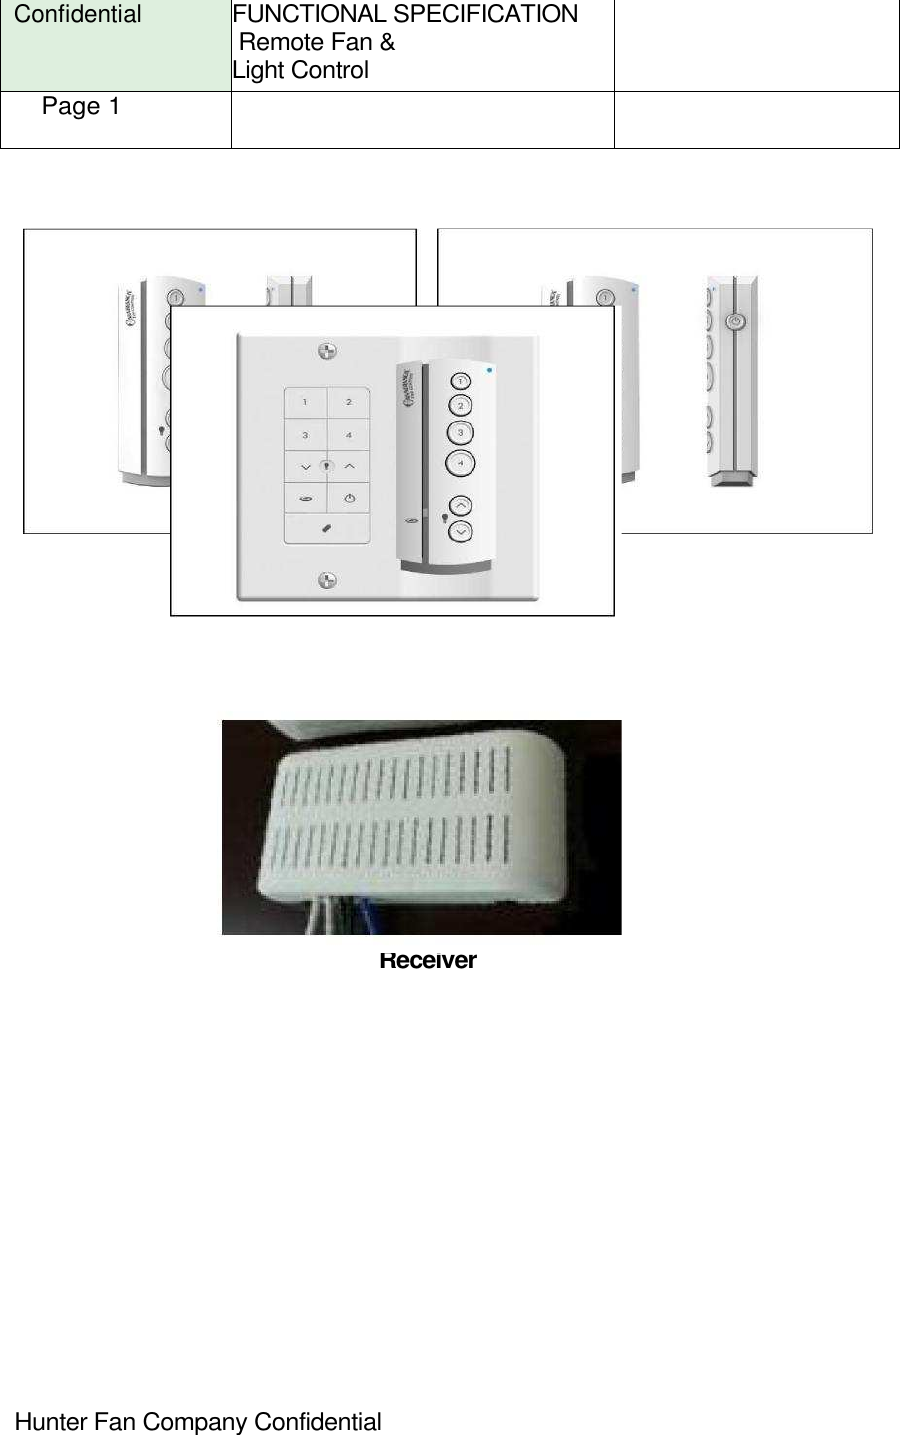  Hunter Fan Company Confidential   Confidential FUNCTIONAL SPECIFICATION  Remote Fan &amp; Light Control   Page 1           65535  65536   Receiver 